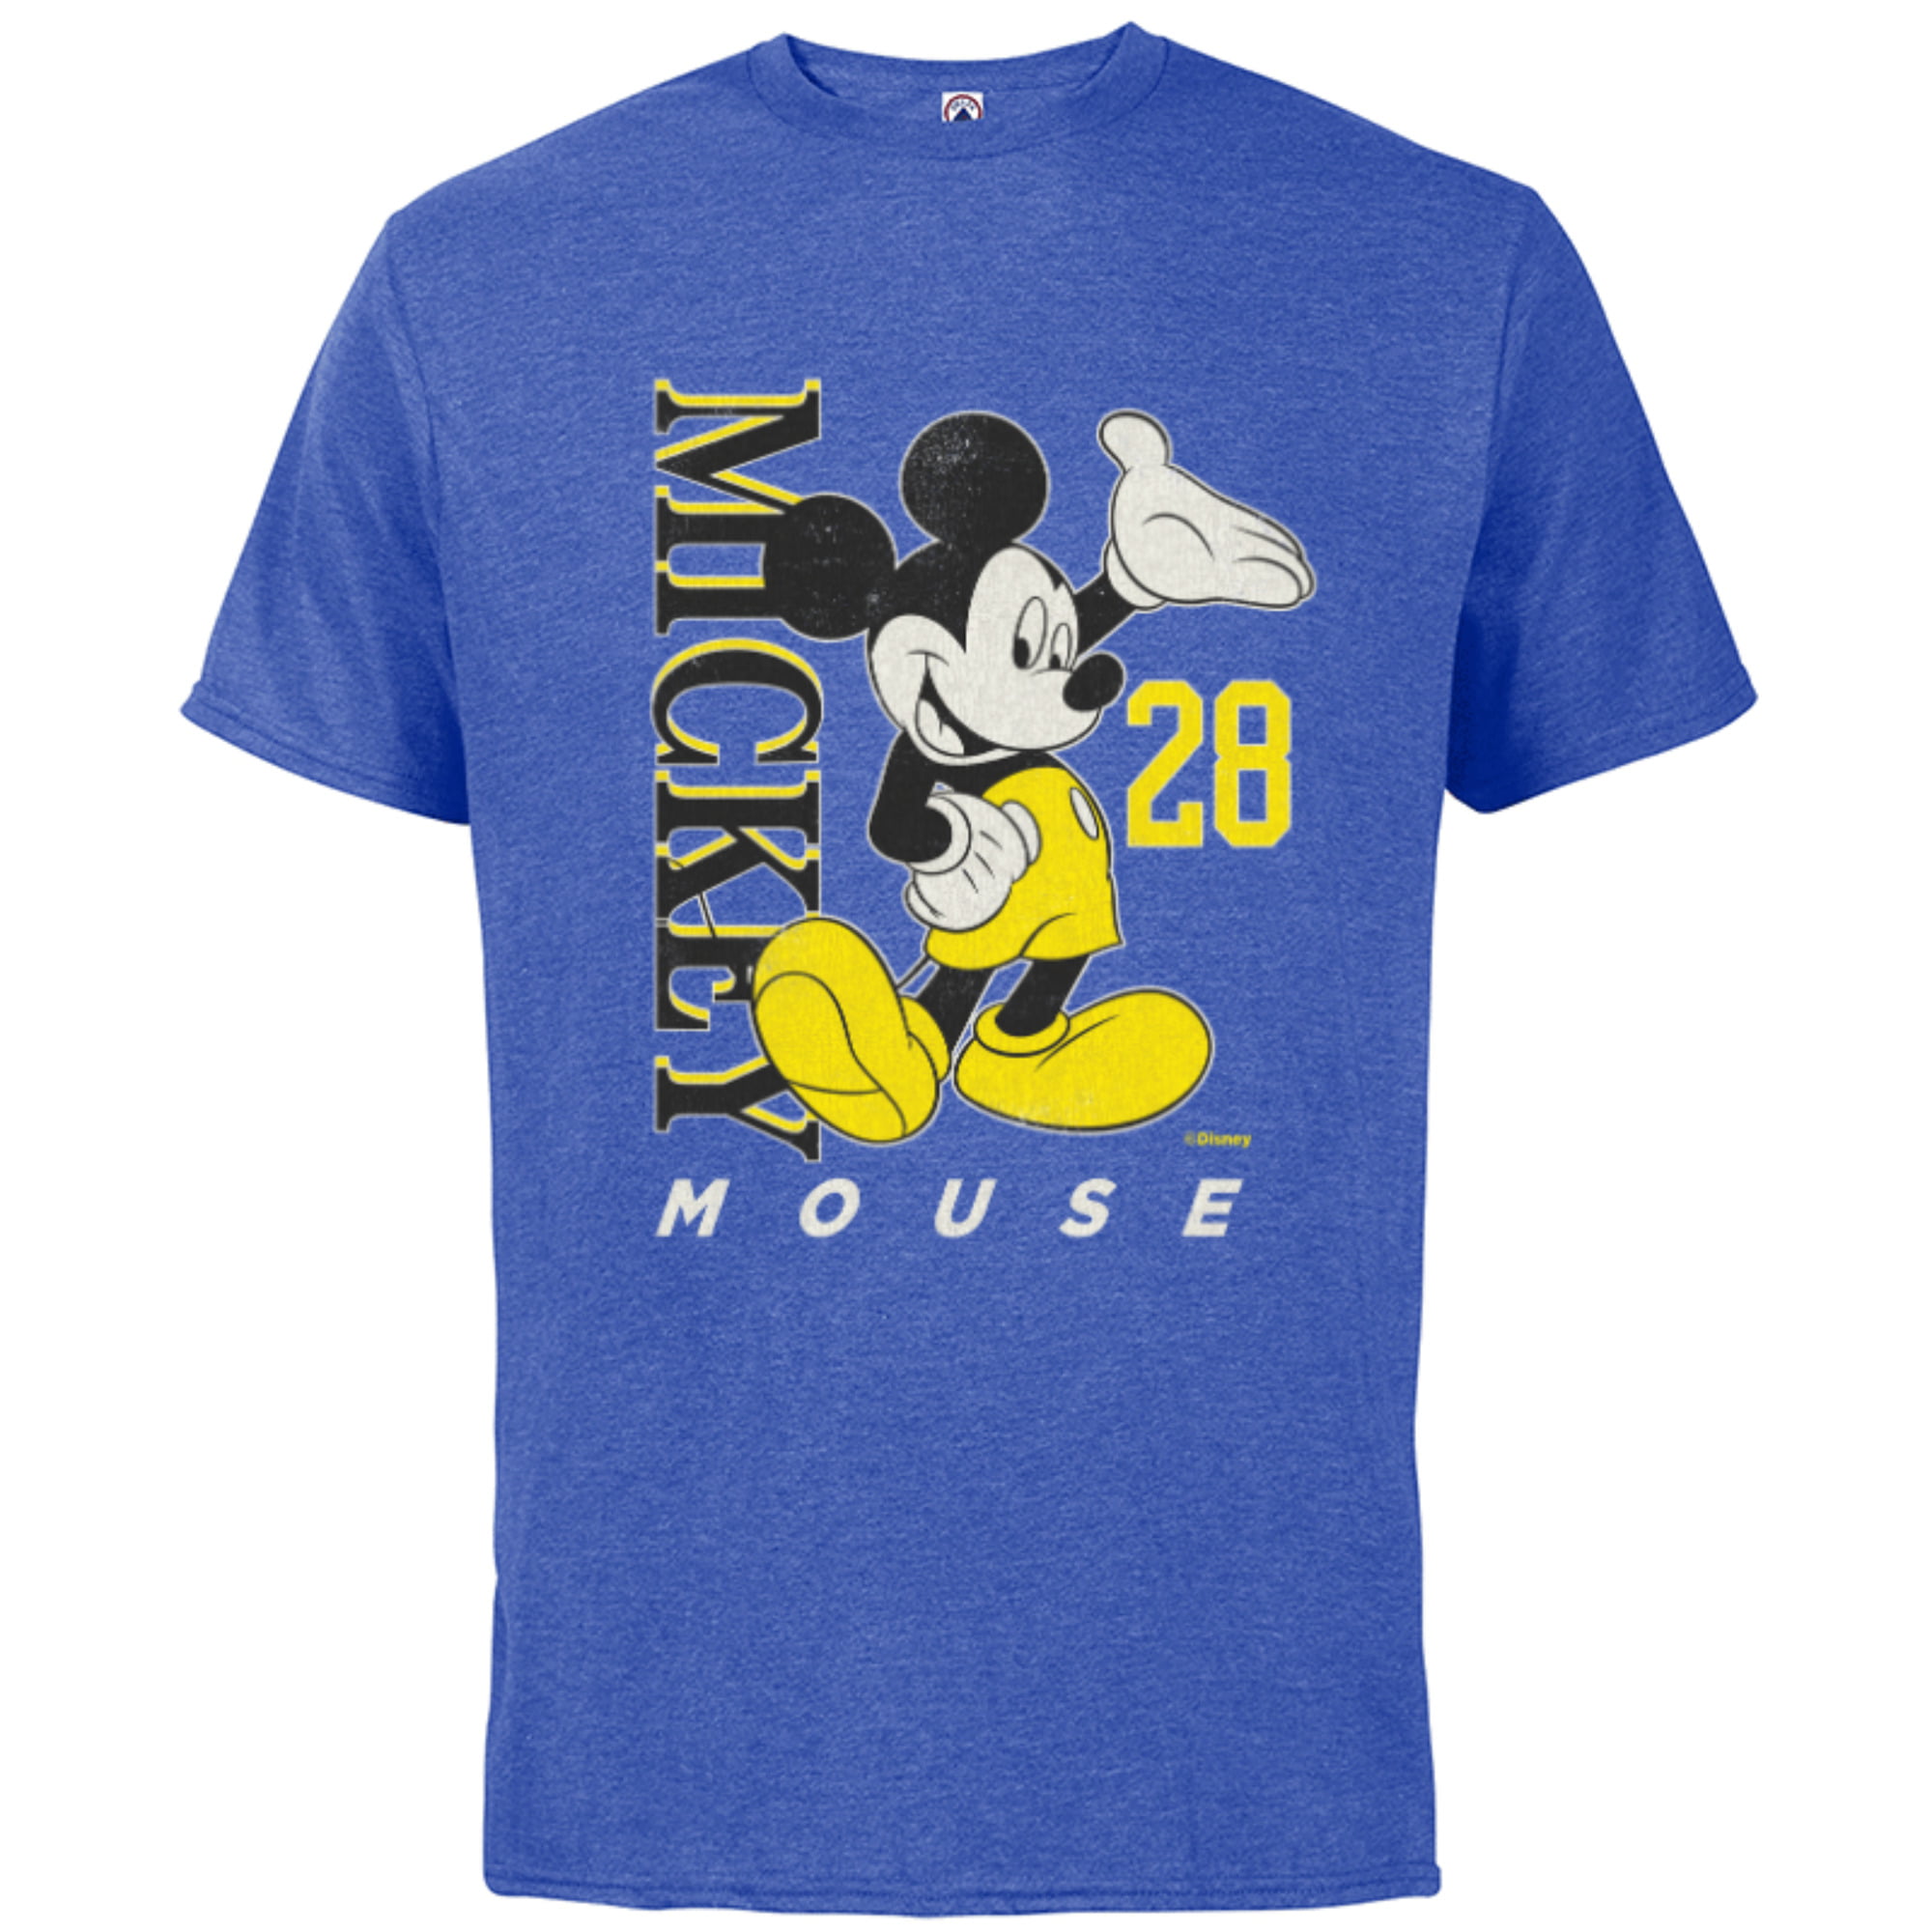 Mouse Cotton Mickey - Customized-Black 28 Black Classics T-Shirt Short Adults for - & Vintage Disney Sleeve Yellow